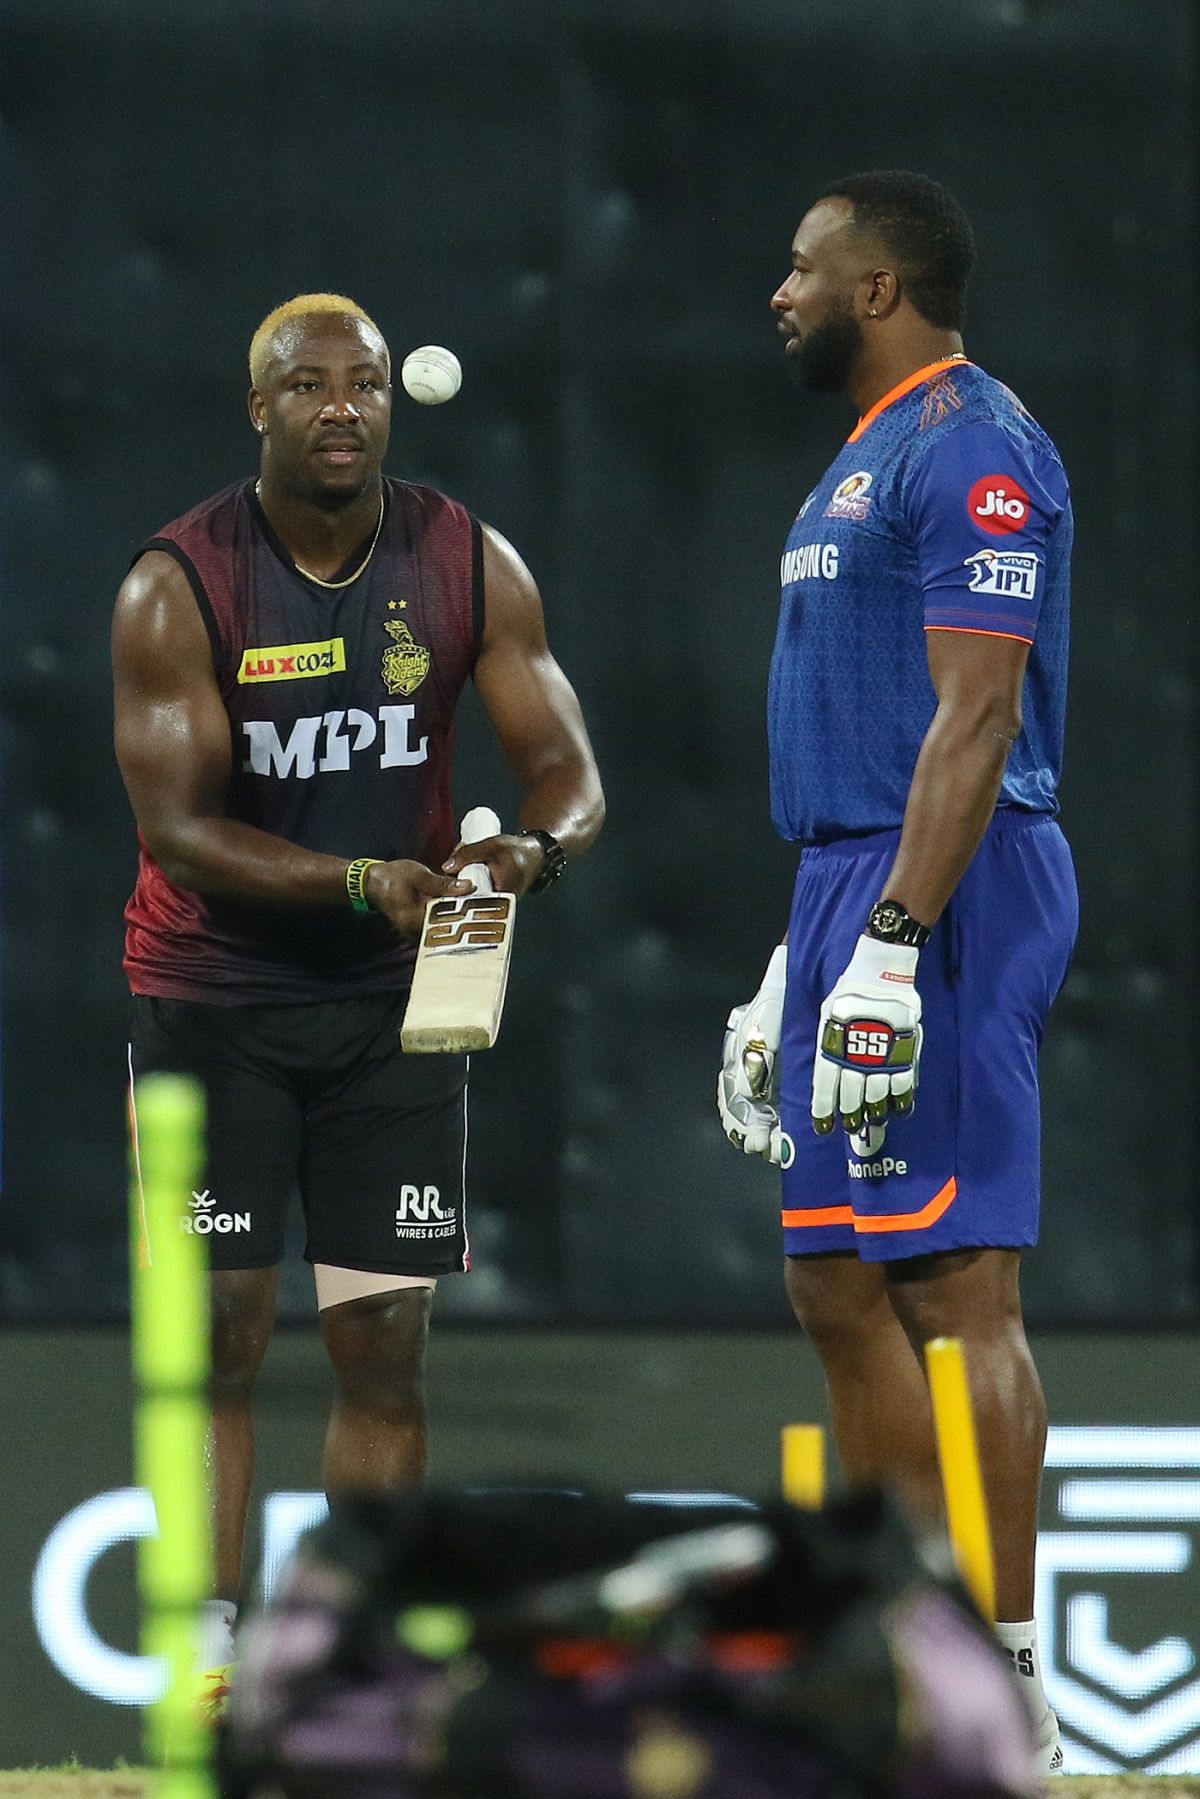 Andre Russell and Kieron Pollard have a chat ahead of the game